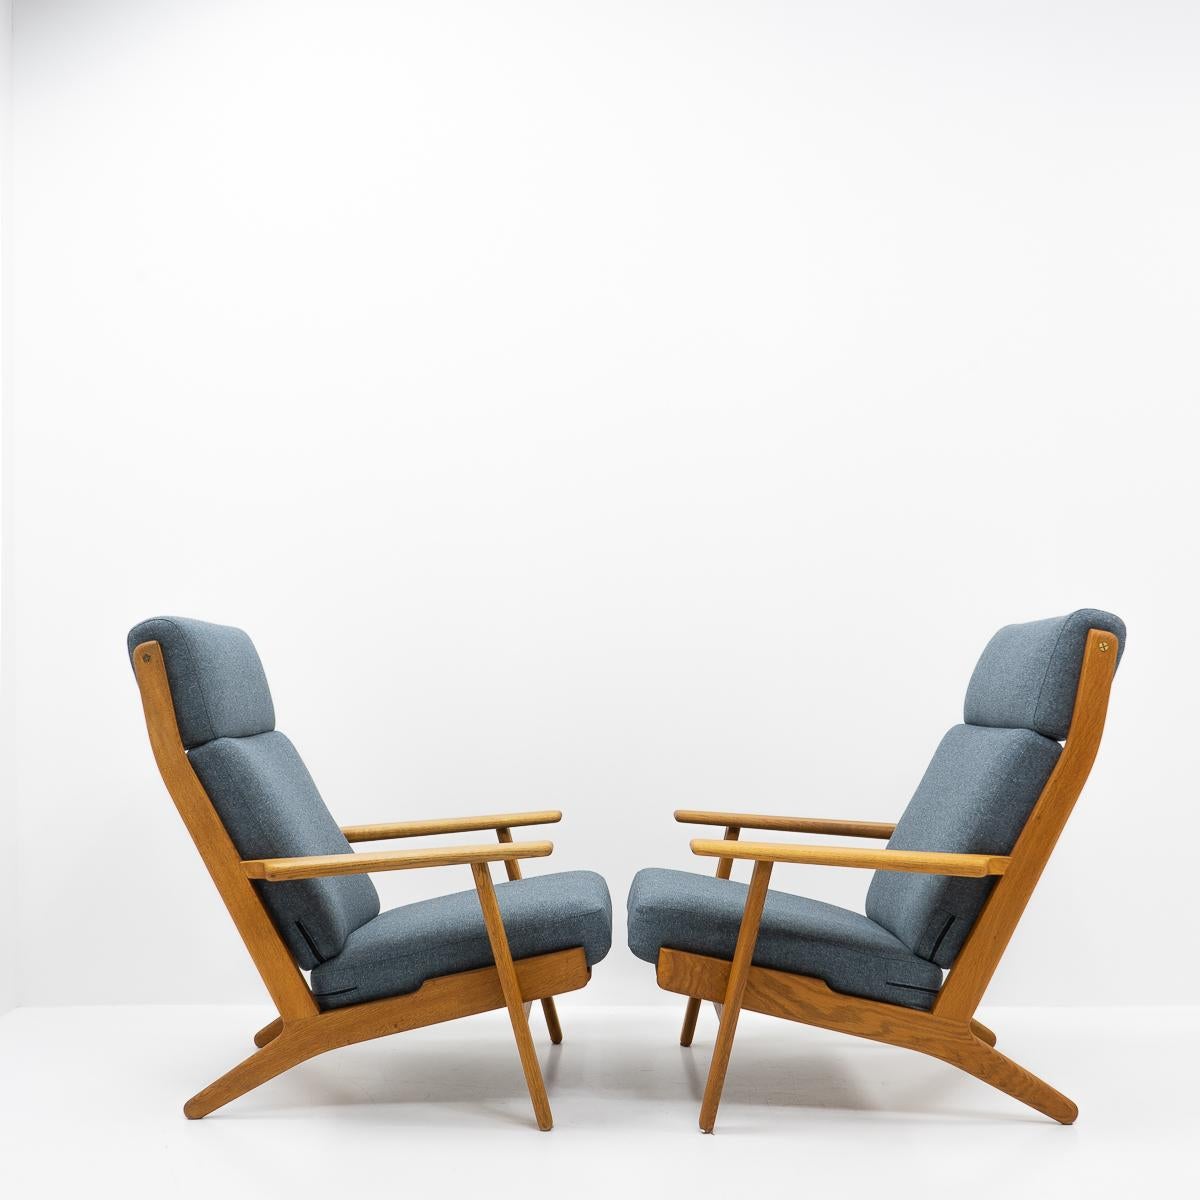 Mid-Century Modern Danish Design Classic GE 290 Arm Chairs by Hans Wegner for Getama, 1960s For Sale